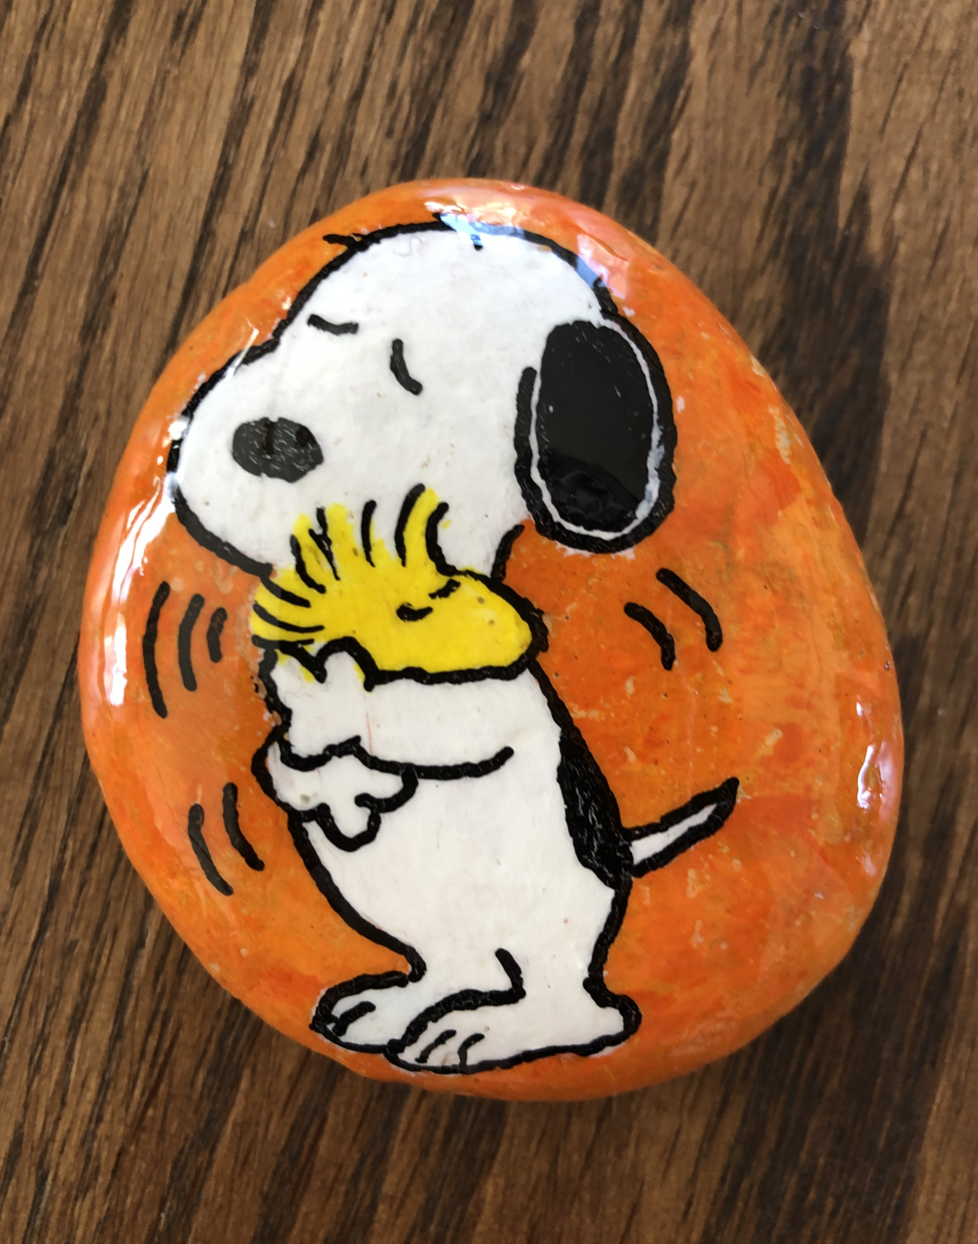 Rock with snoopy consoling his friend